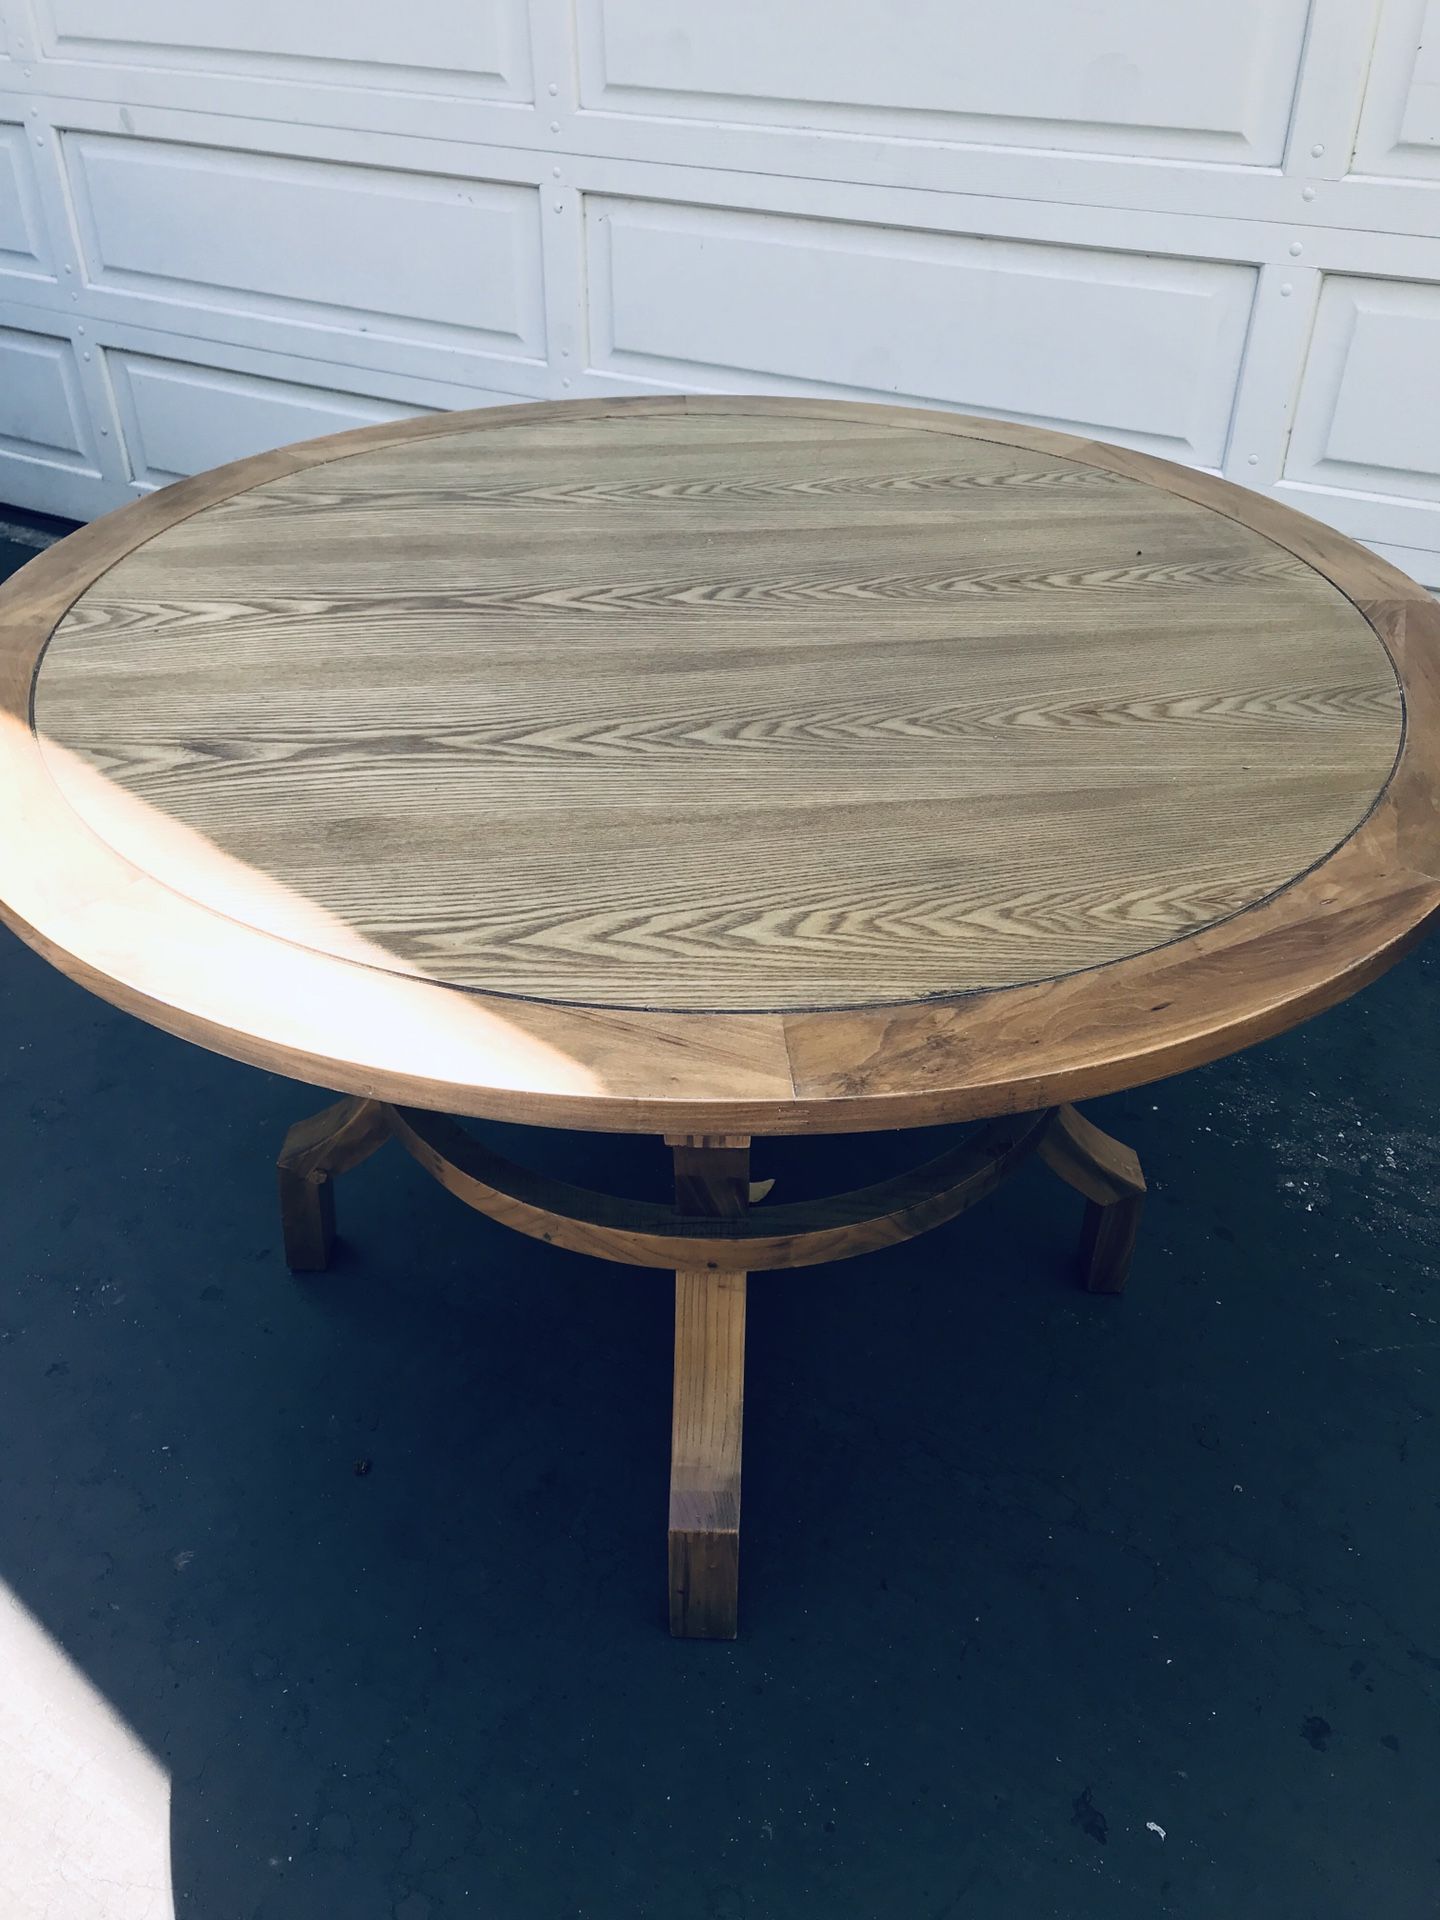 Solid wood kitchen table 48” round